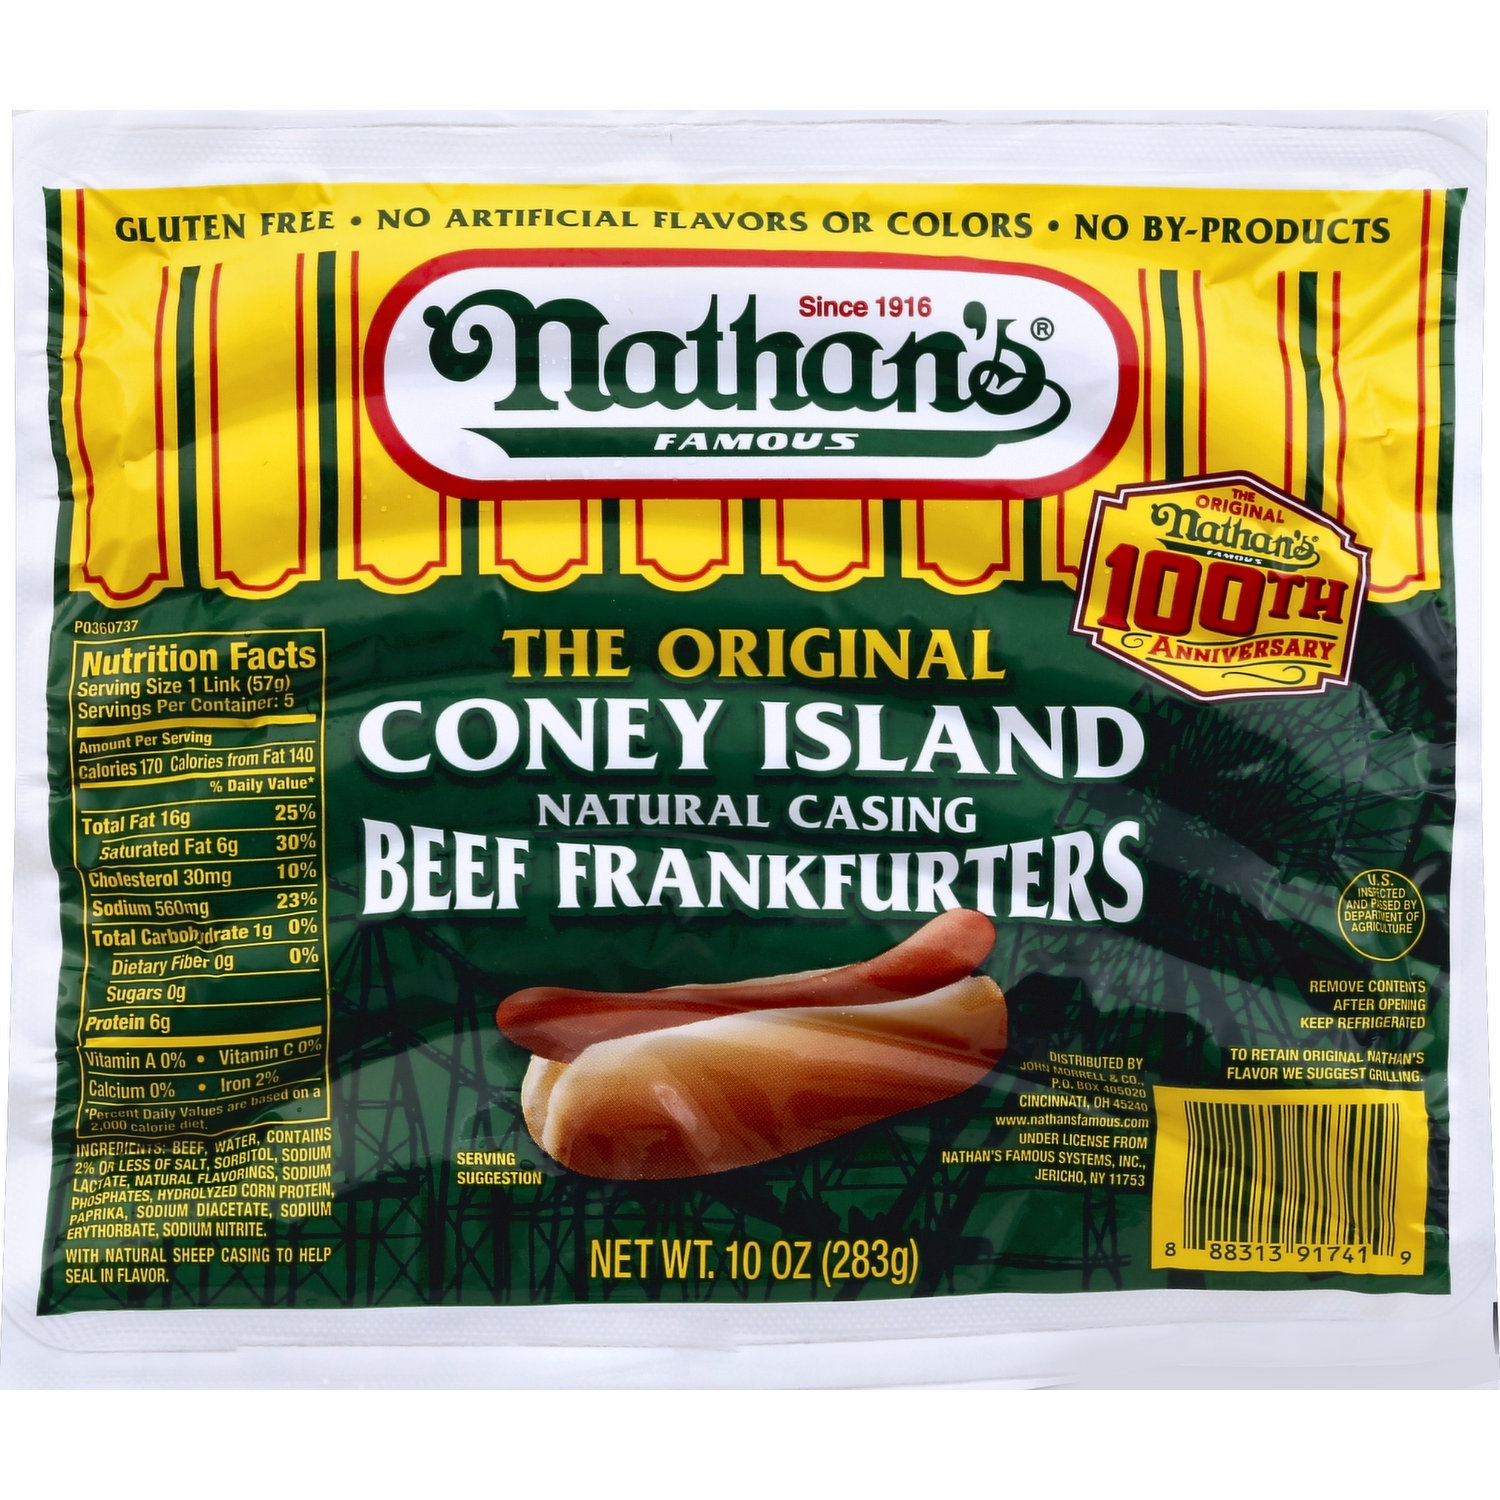 Beef Hot Dog 6 To 1 Kosher, 20 lb, 120 count – Chefs' Warehouse